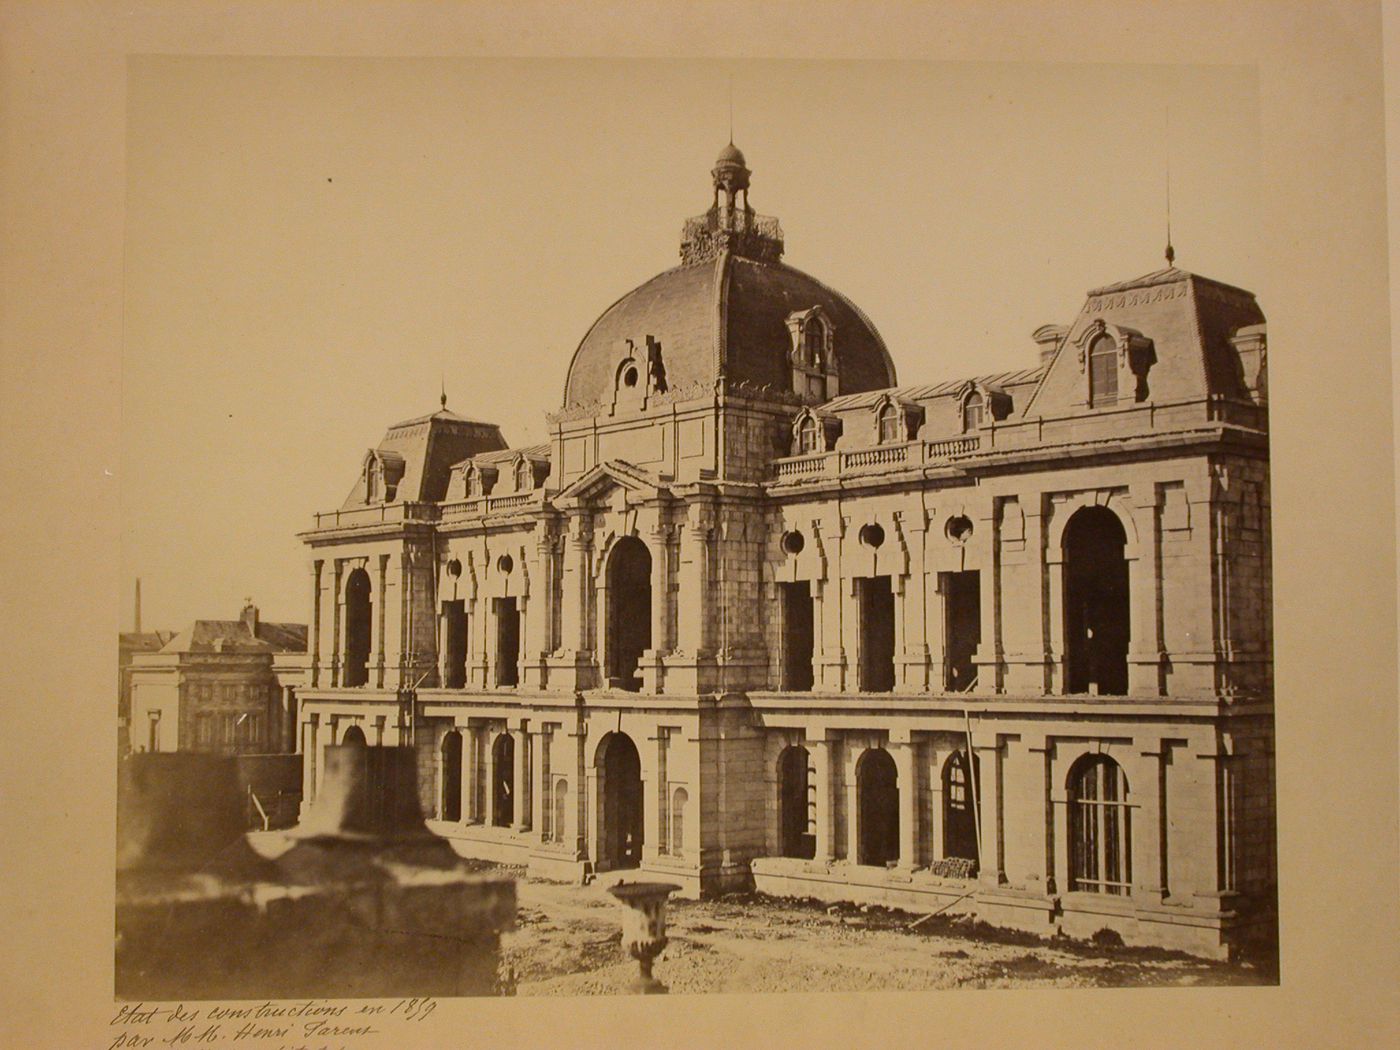 Musée d'Amiens: View of domed building under construction, Amiens, France